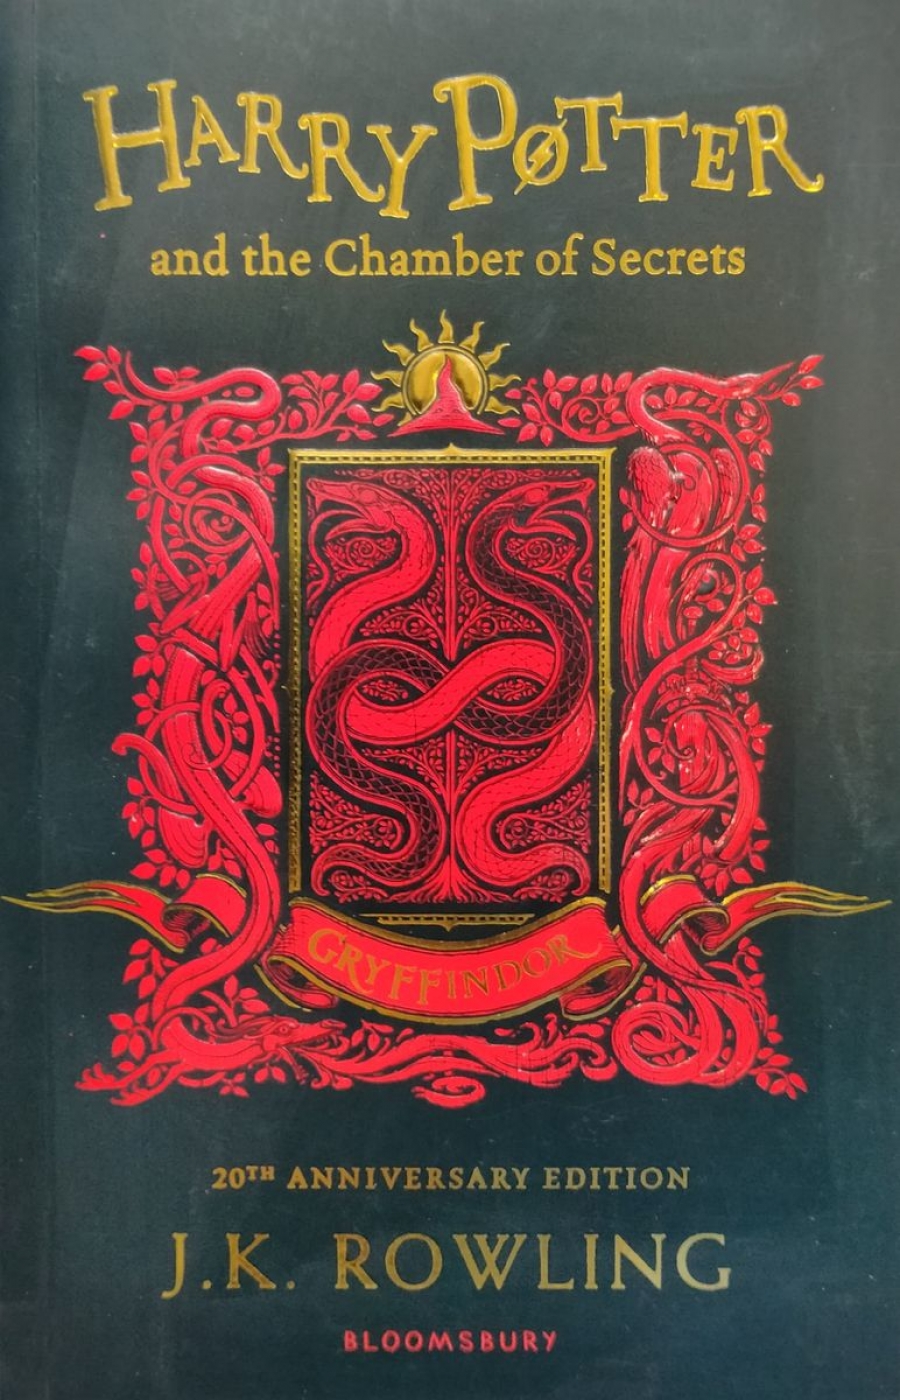 Rowling J.K. Harry Potter and the Chamber of Secrets - Gryffindor Edition 